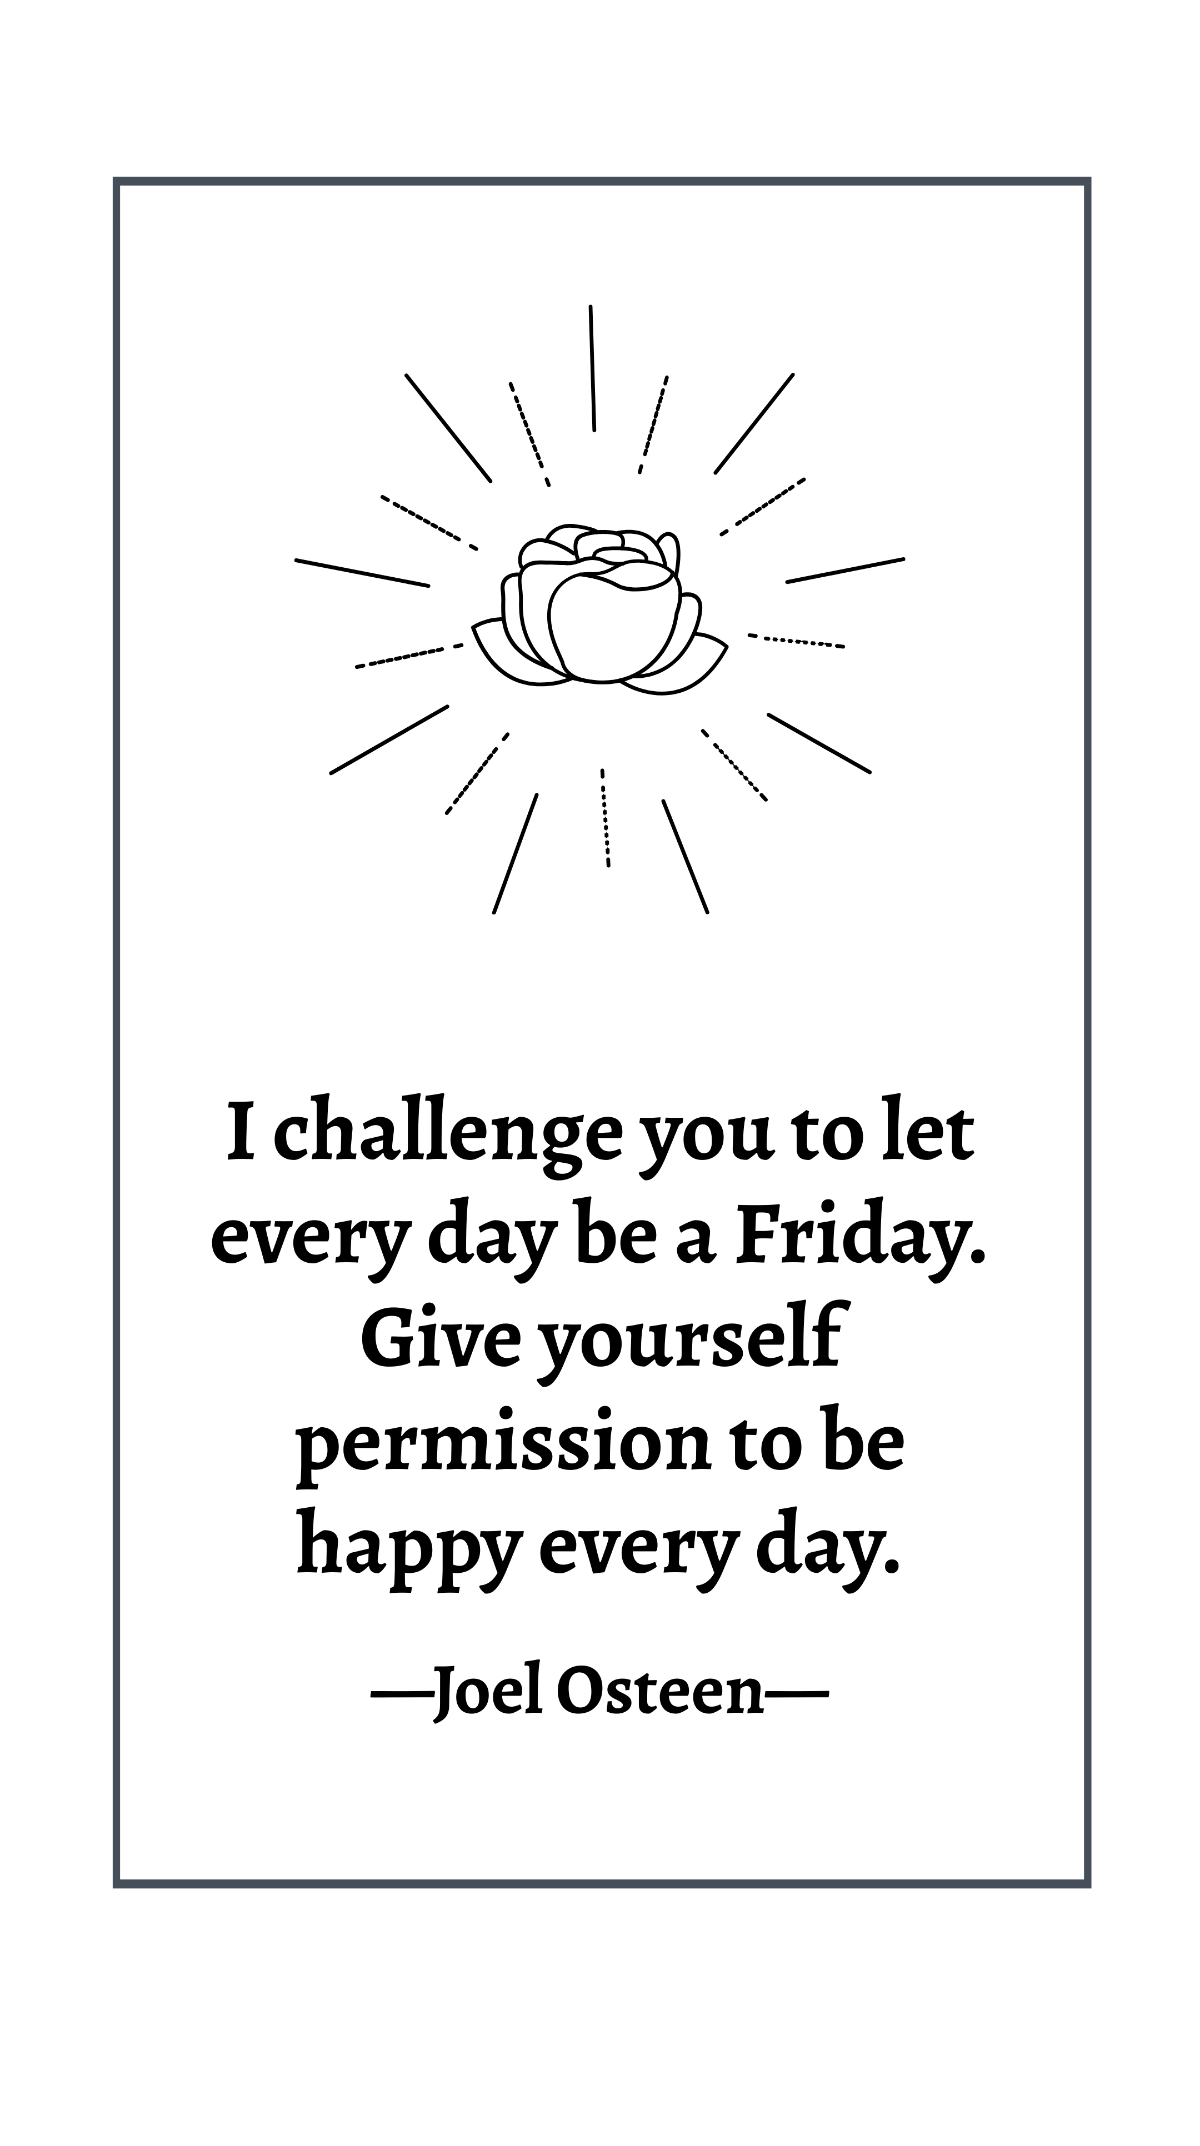 Joel Osteen - I challenge you to let every day be a Friday. Give yourself permission to be happy every day. Template